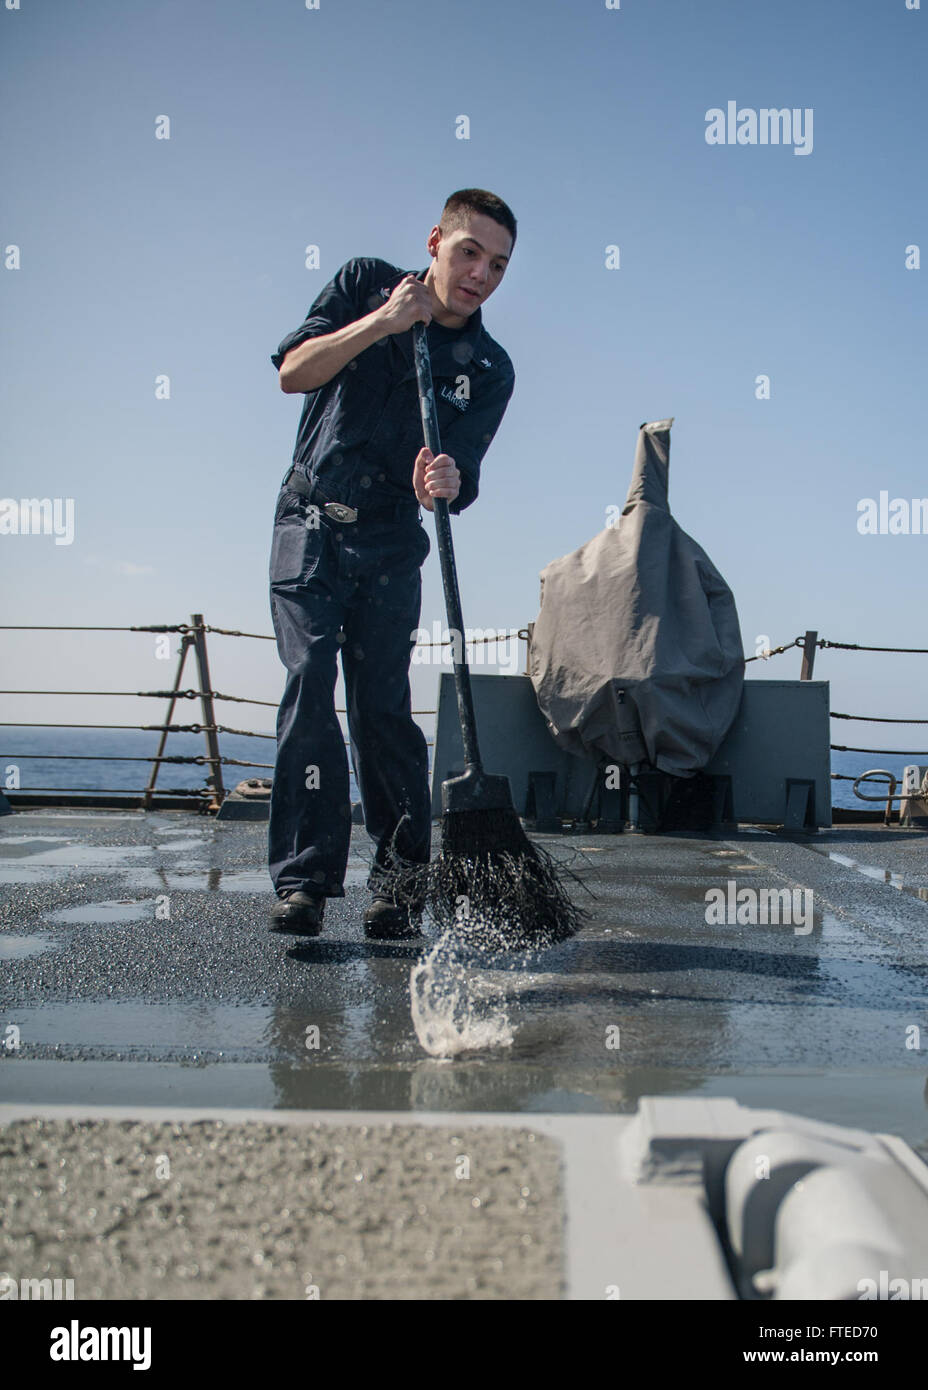 140408-N-EI510-044 MEDITERRANEAN SEA (April 08, 2014) -Interior Communications Electrician 3rd Class Eric Larose, from Tampa, Fla., participates in a fresh water wash down aboard the Arleigh Burke-class guided-missile destroyer USS Truxtun (DDG 103). Truxtun is deployed as part of the George H.W. Bush Carrier Strike Group on a scheduled deployment supporting maritime security operations and theater security cooperation efforts in the U.S. 5th Fleet area of responsibility. (U.S. Navy photo by Mass Communication Specialist 3rd Class Scott Barnes/Released) Stock Photo